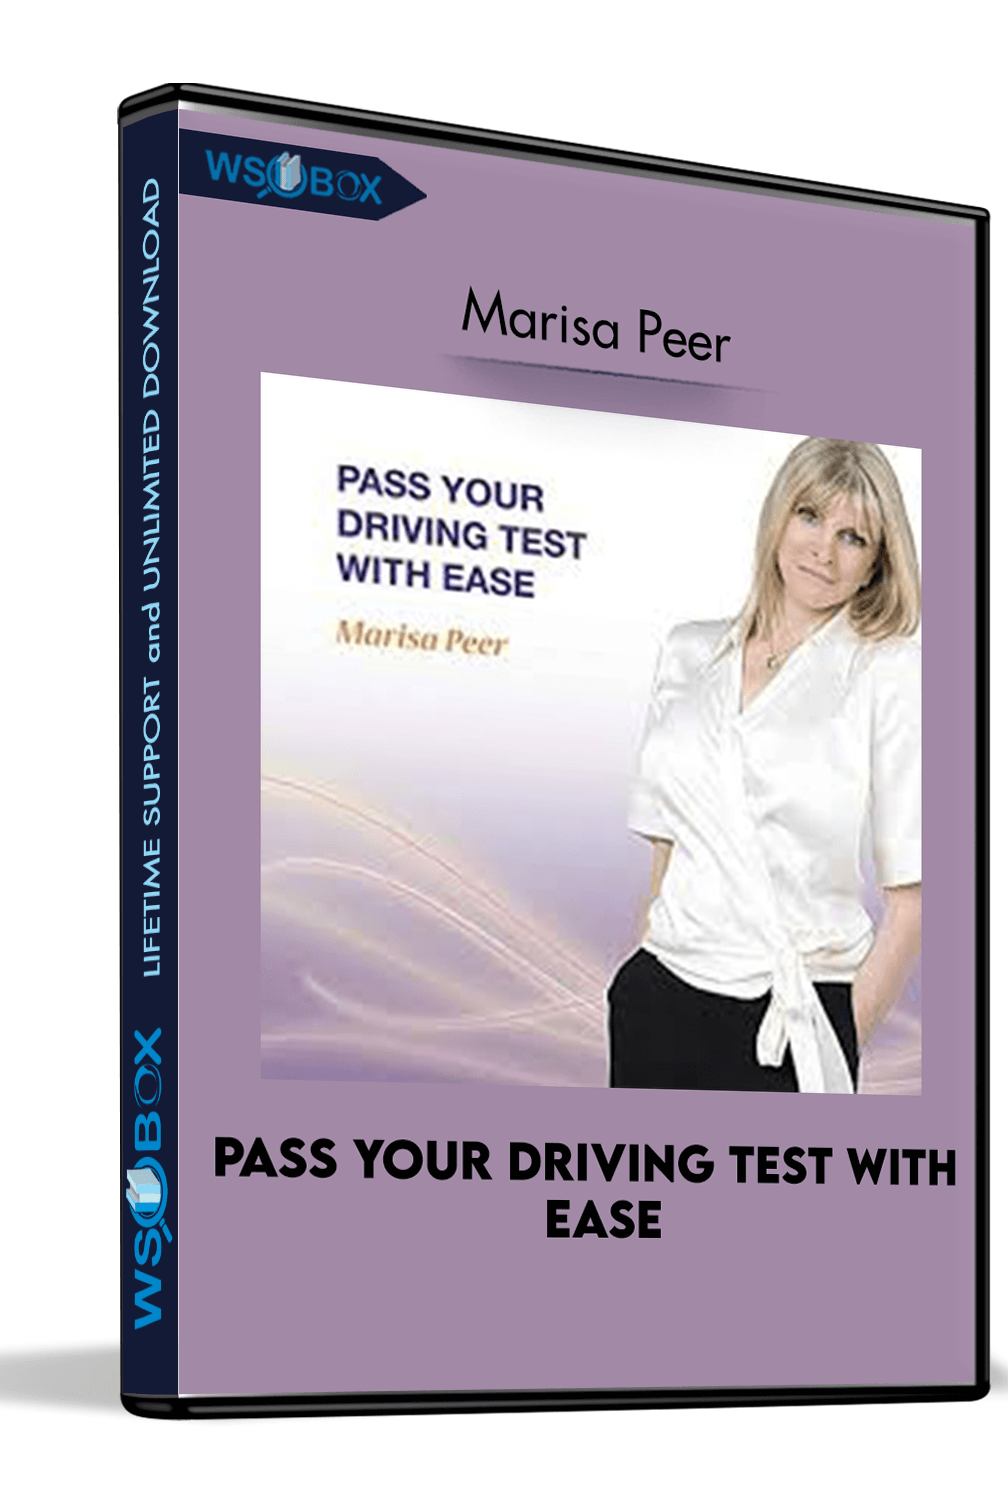 pass-your-driving-test-with-ease-marisa-peer